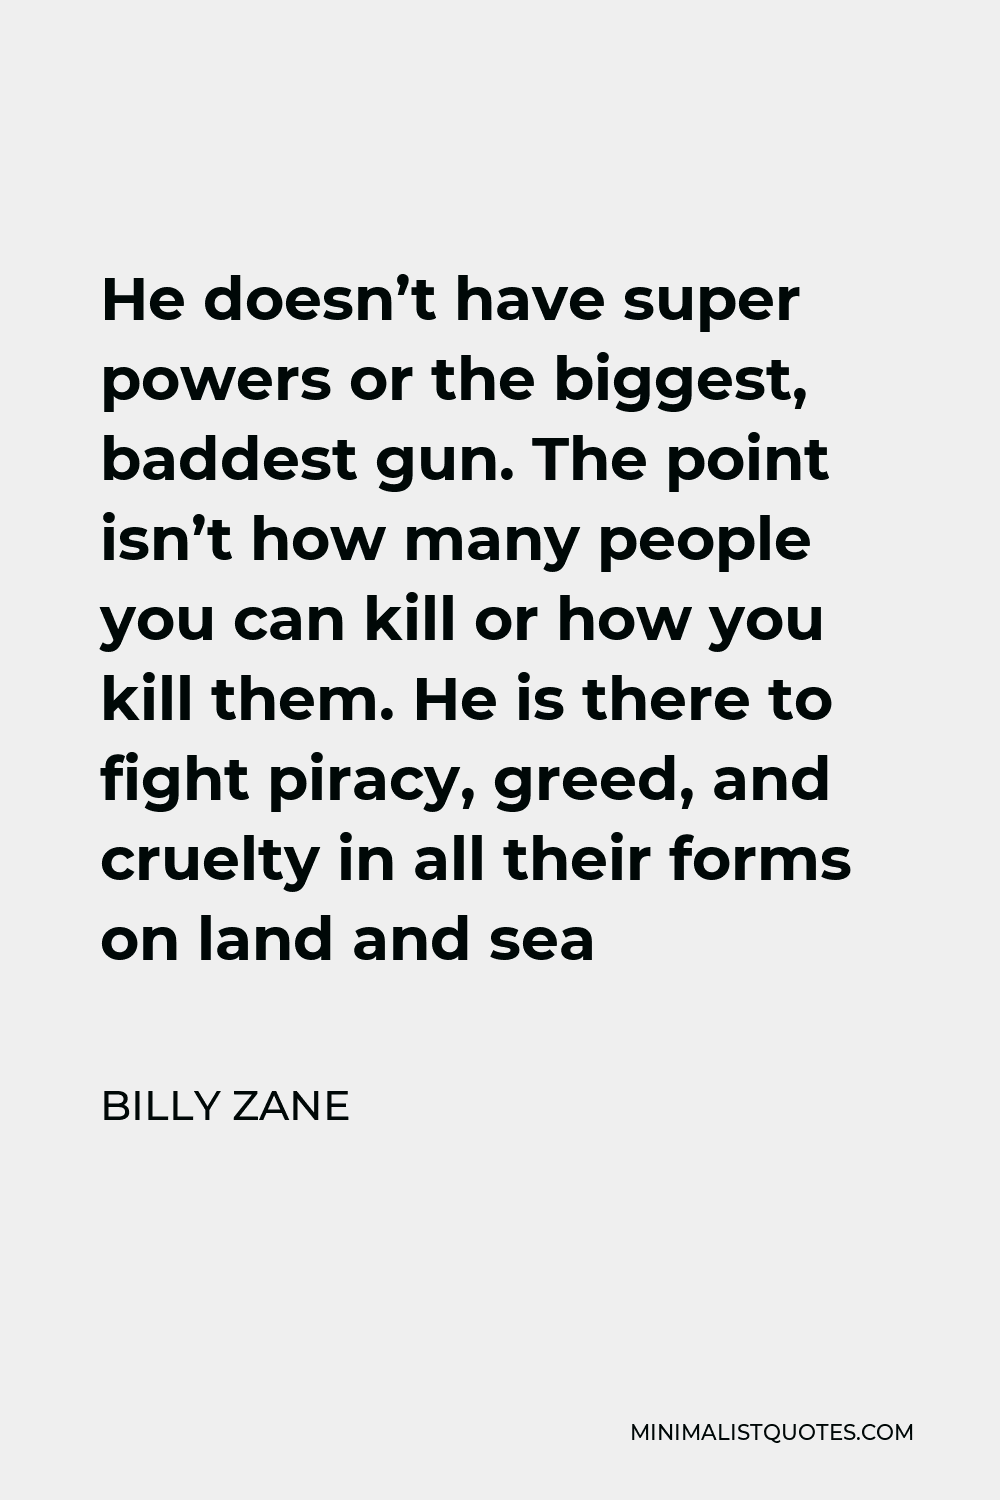 Billy Zane Quote - He doesn’t have super powers or the biggest, baddest gun. The point isn’t how many people you can kill or how you kill them. He is there to fight piracy, greed, and cruelty in all their forms on land and sea